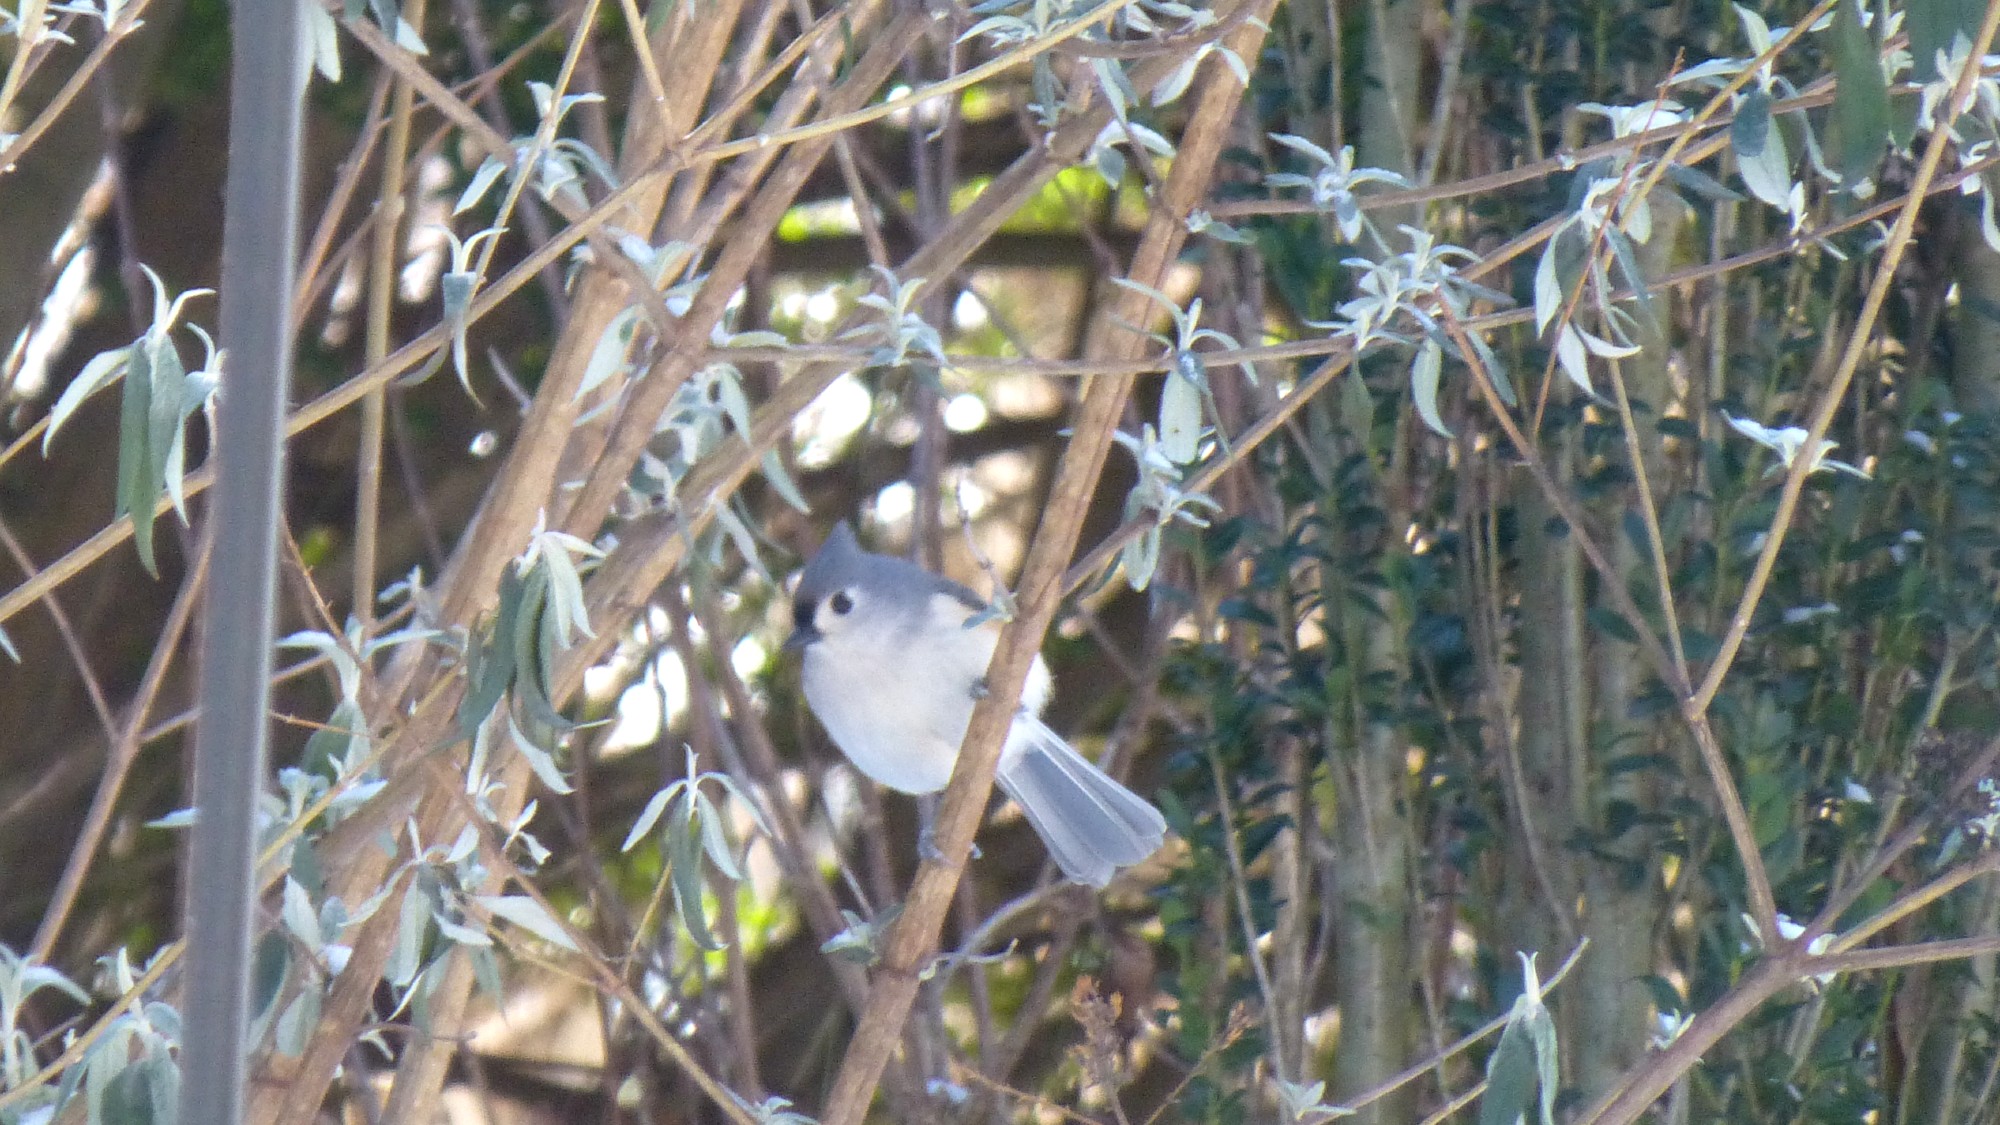 Small white bird with gray crest and tail sitting on upright shrub branch